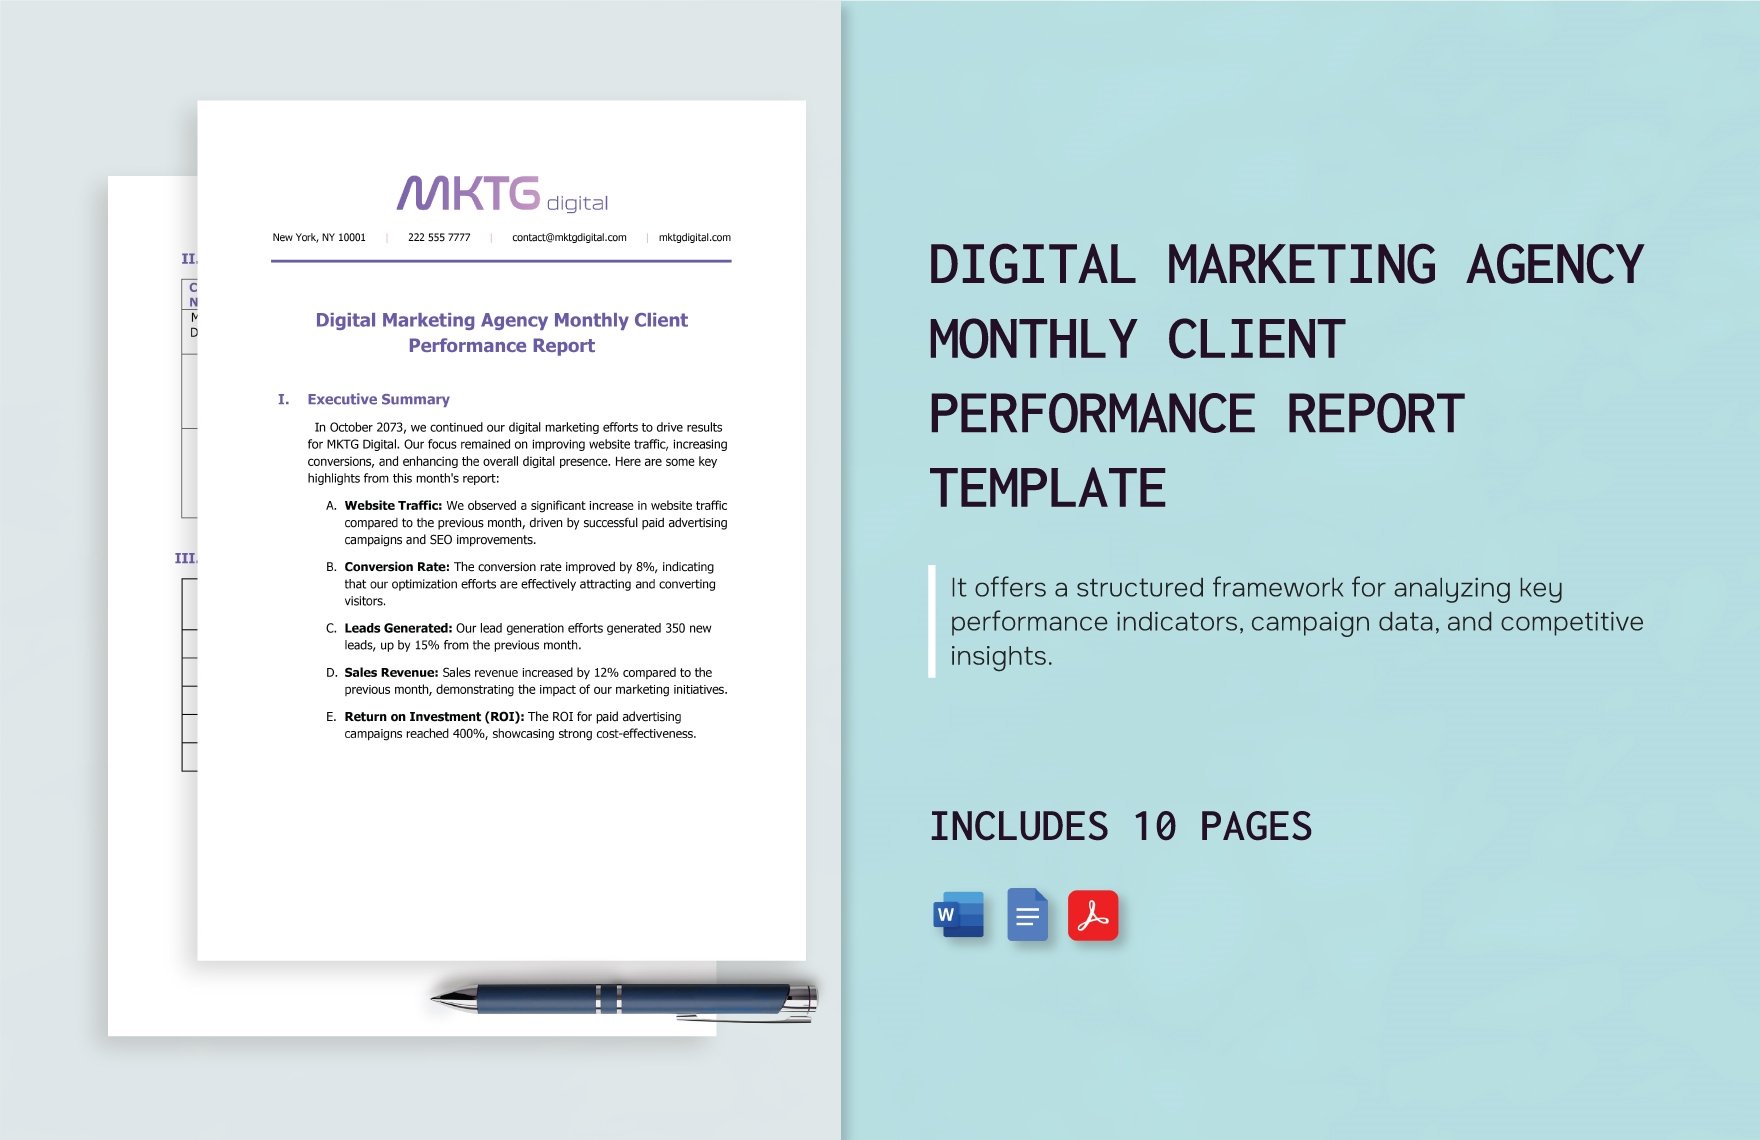 Digital Marketing Agency Monthly Client Performance Report Template